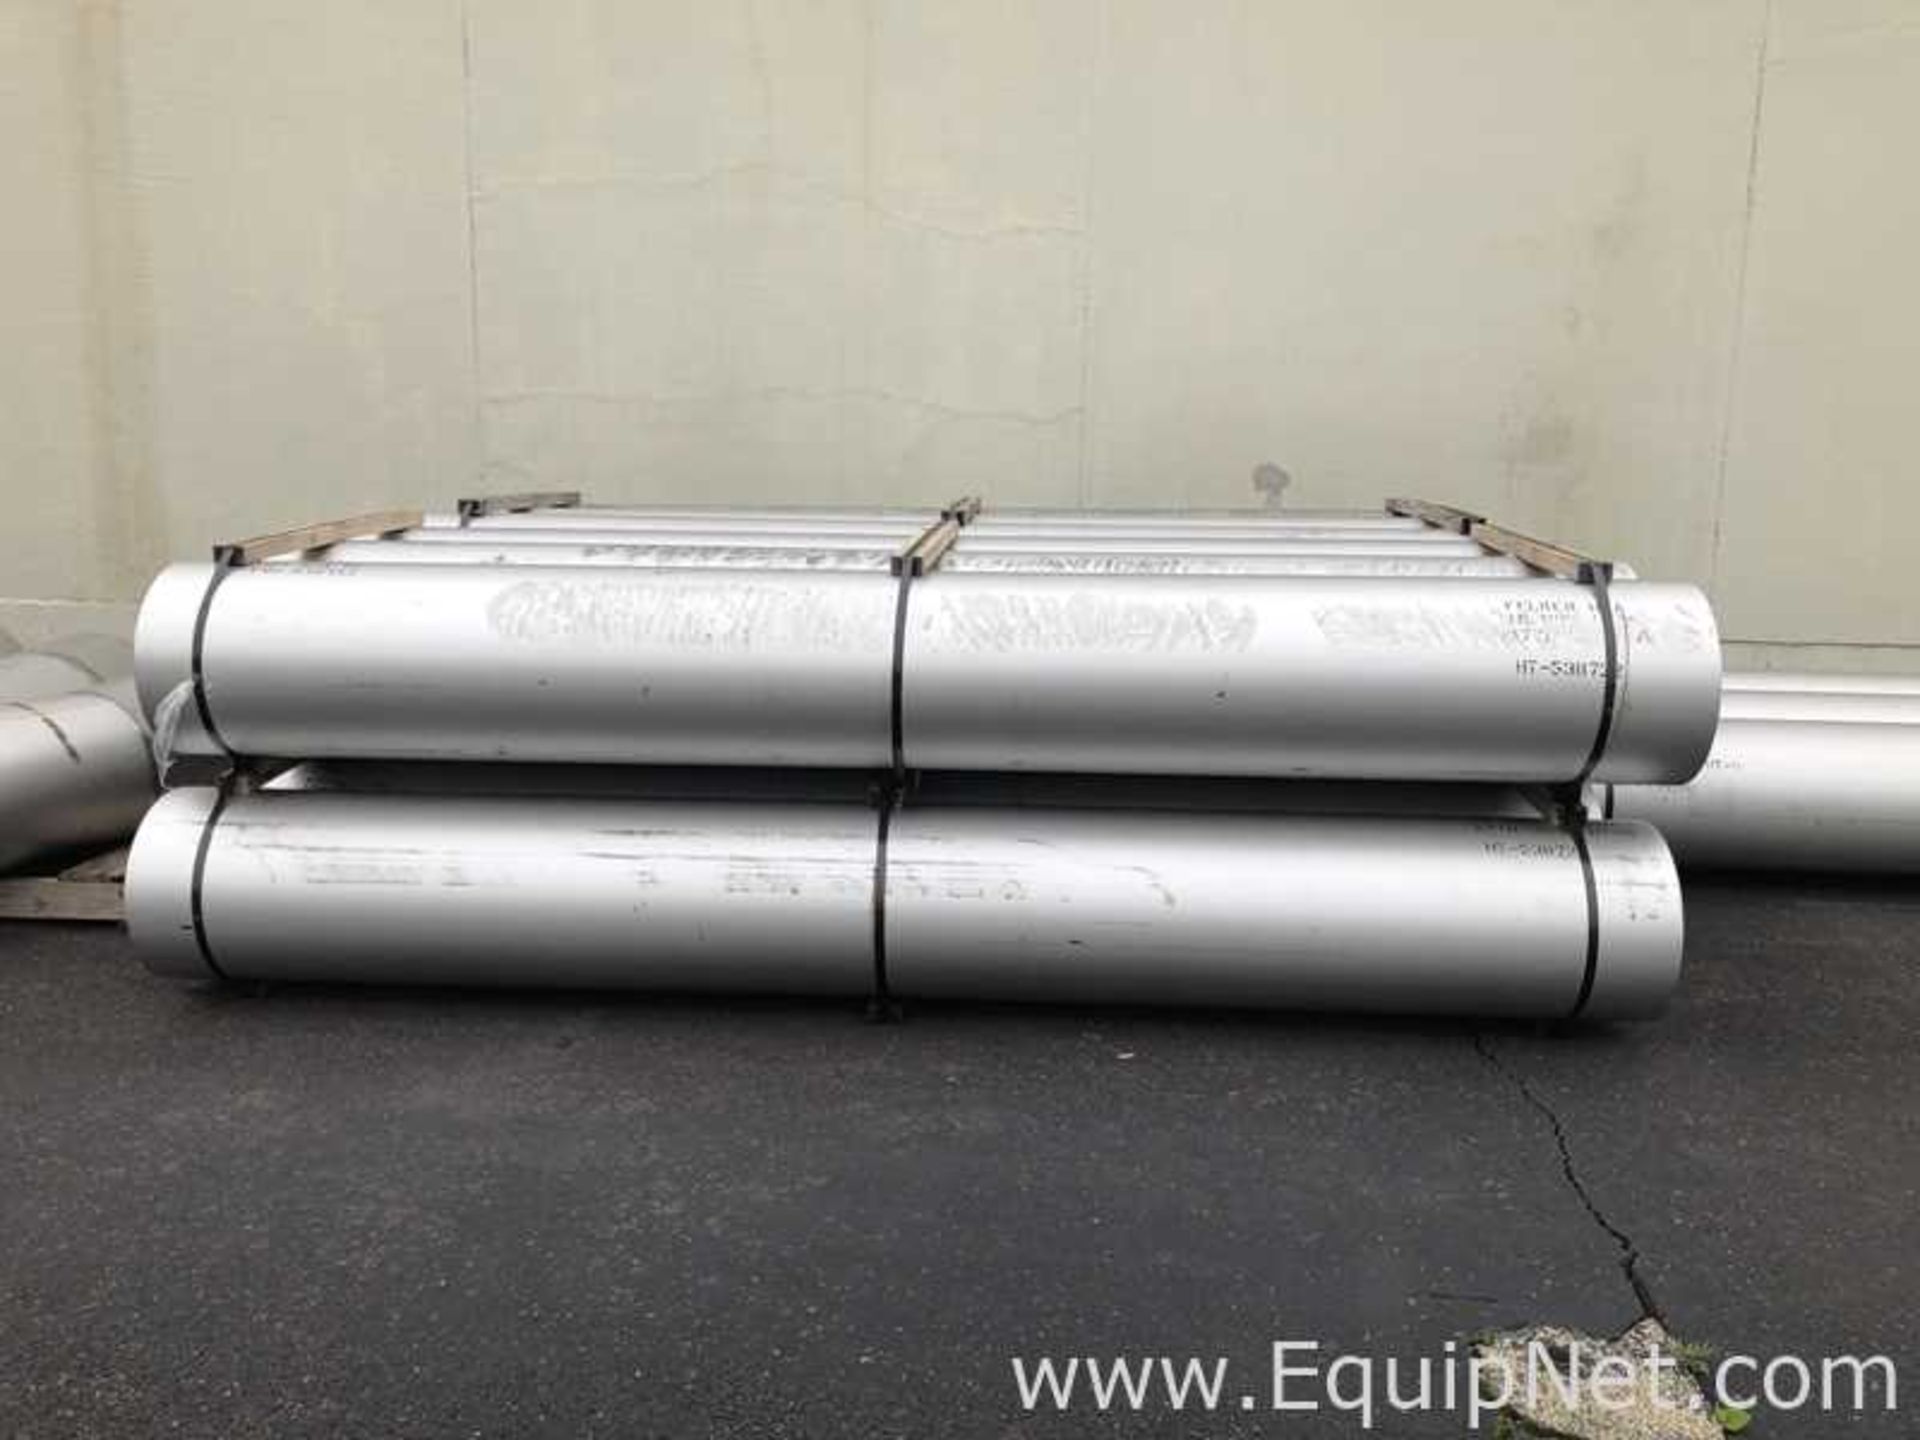 Lot Of Approx 15 Stainless Steel 304L Piping 16in diam X 150in Length Sections And Semi Elbows - Image 5 of 12